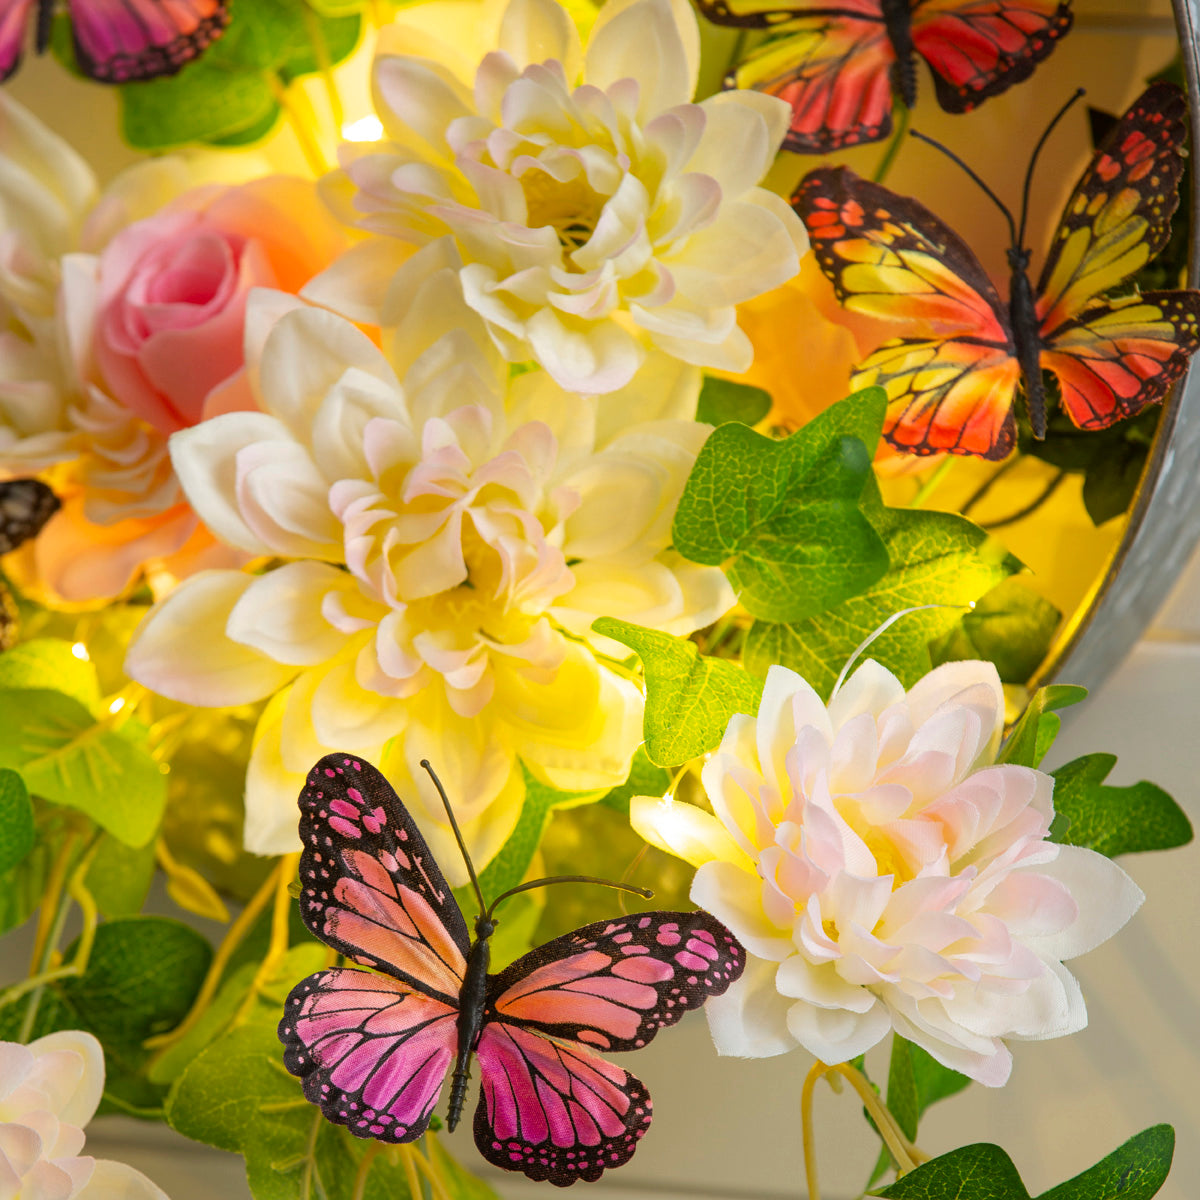 Floral and Butterflies Wall Decor Way